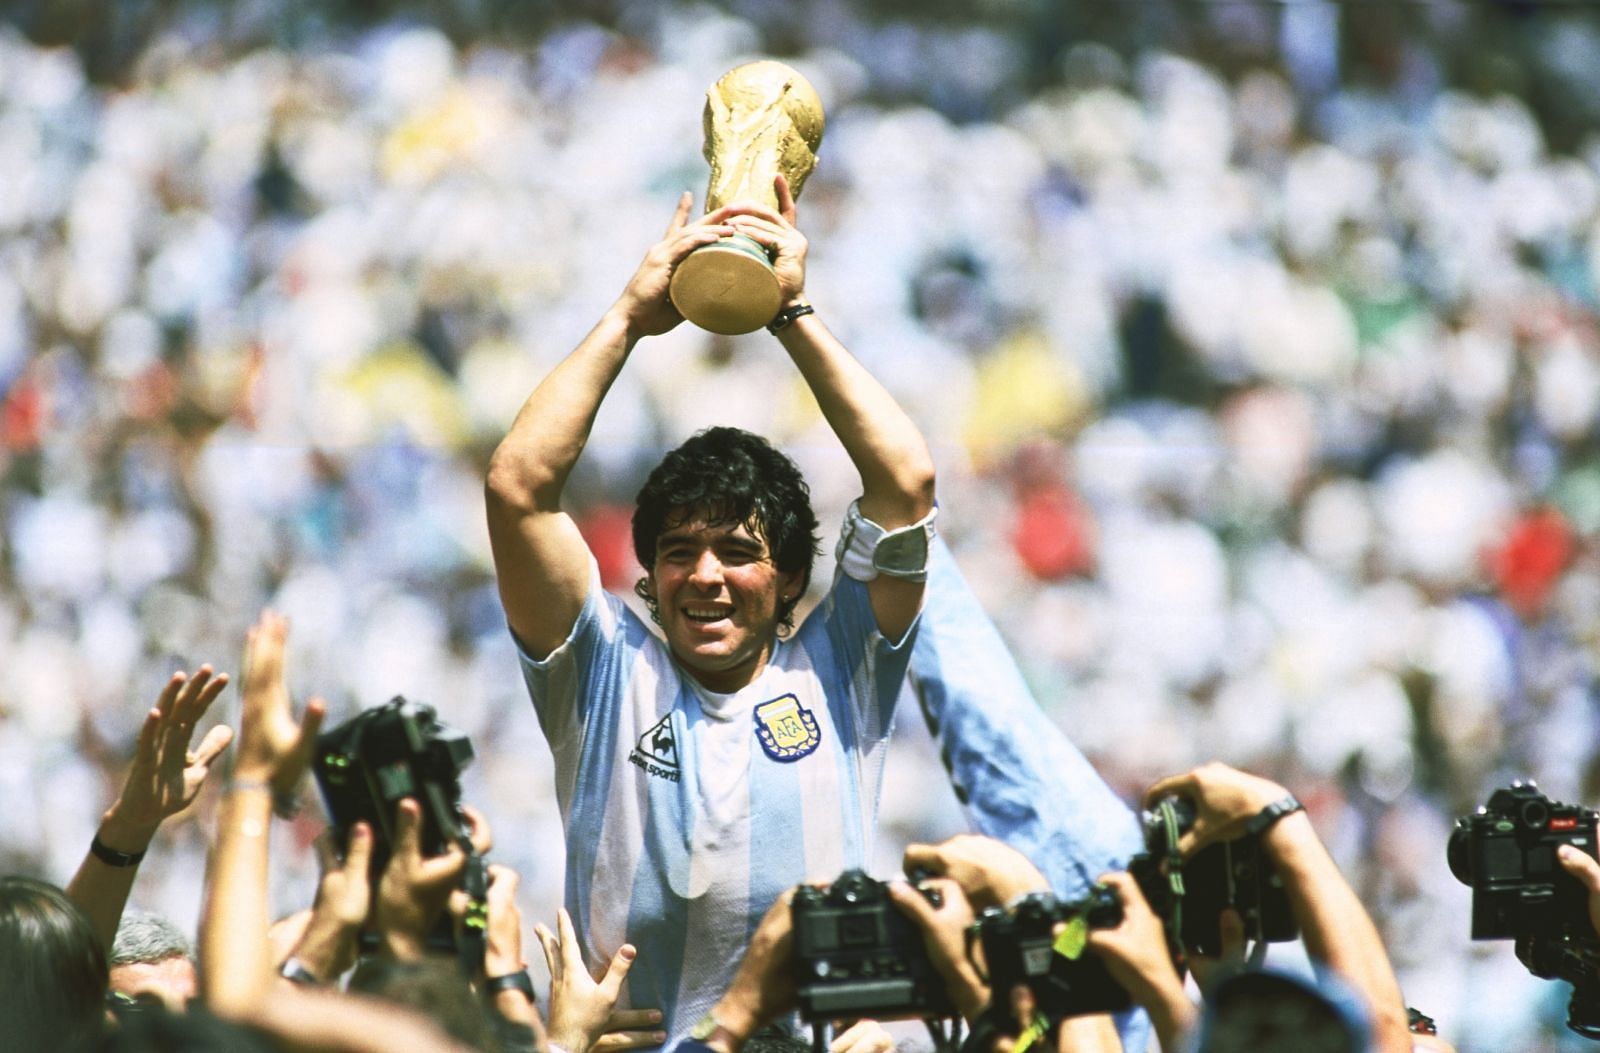 Diego Maradona after winning the 1986 World Cup with Argentina